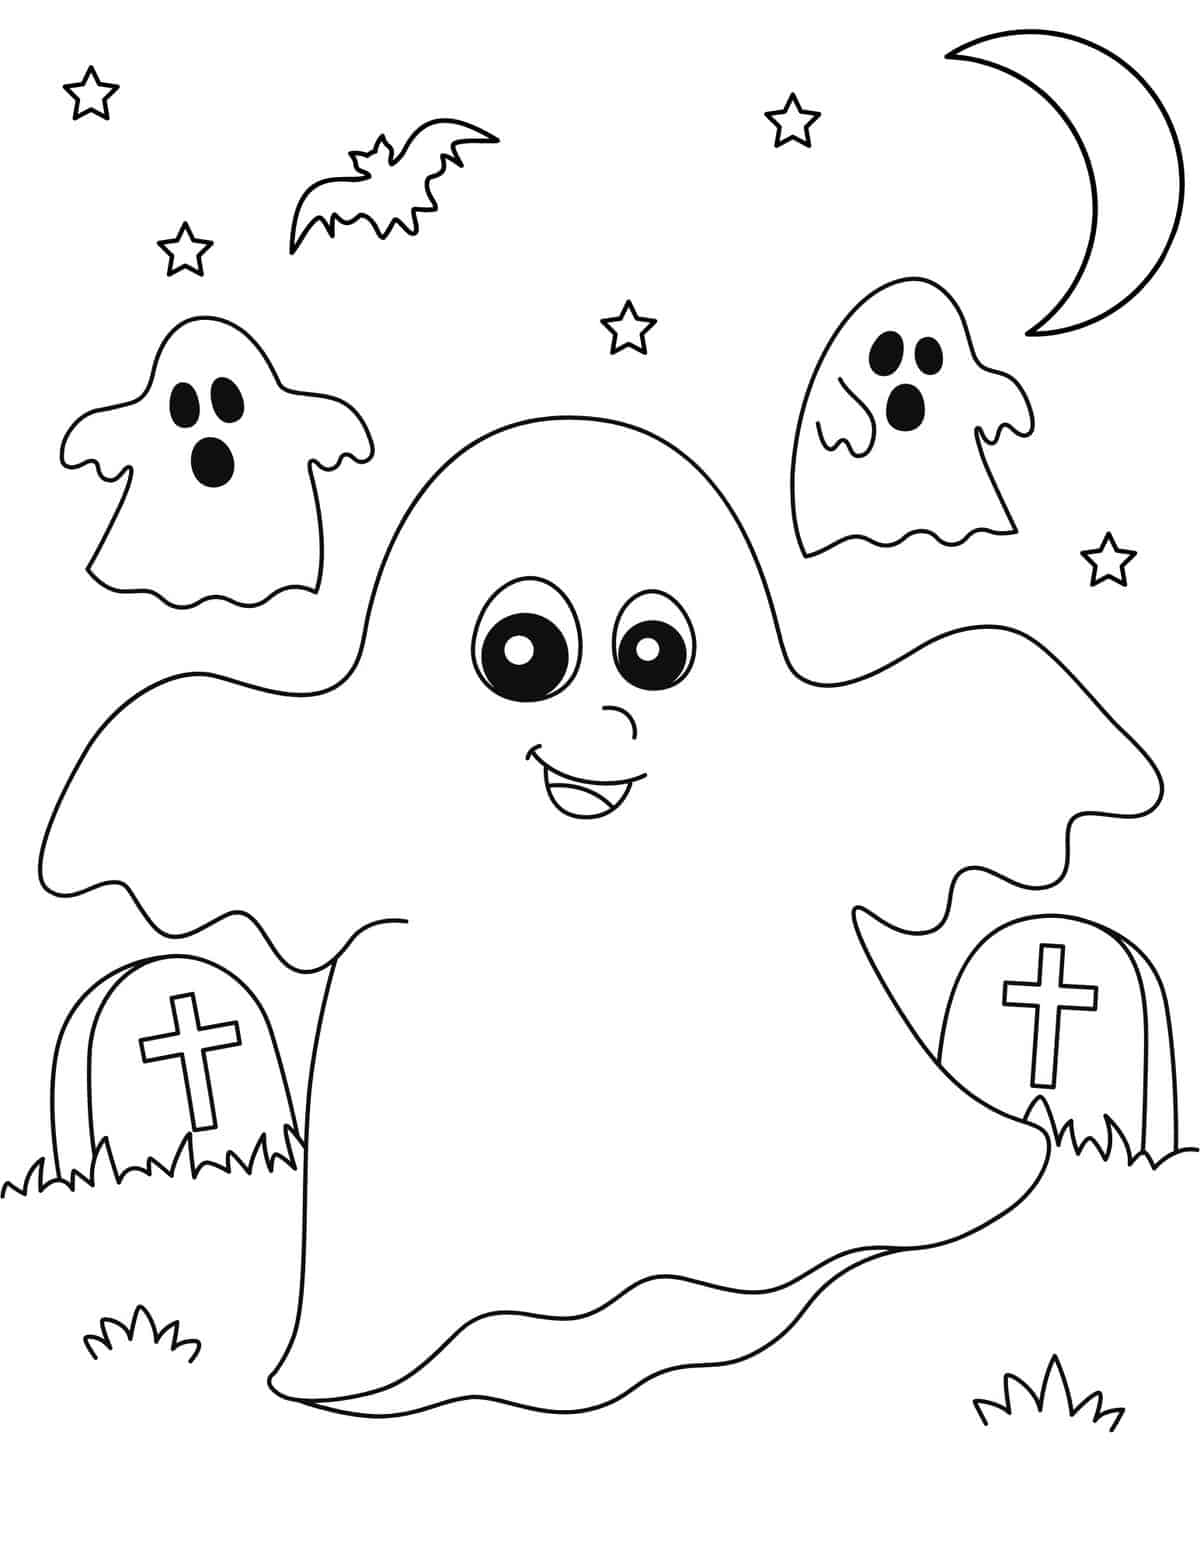 80 Halloween Coloring Pages: Spooky Fun for All Ages Printable